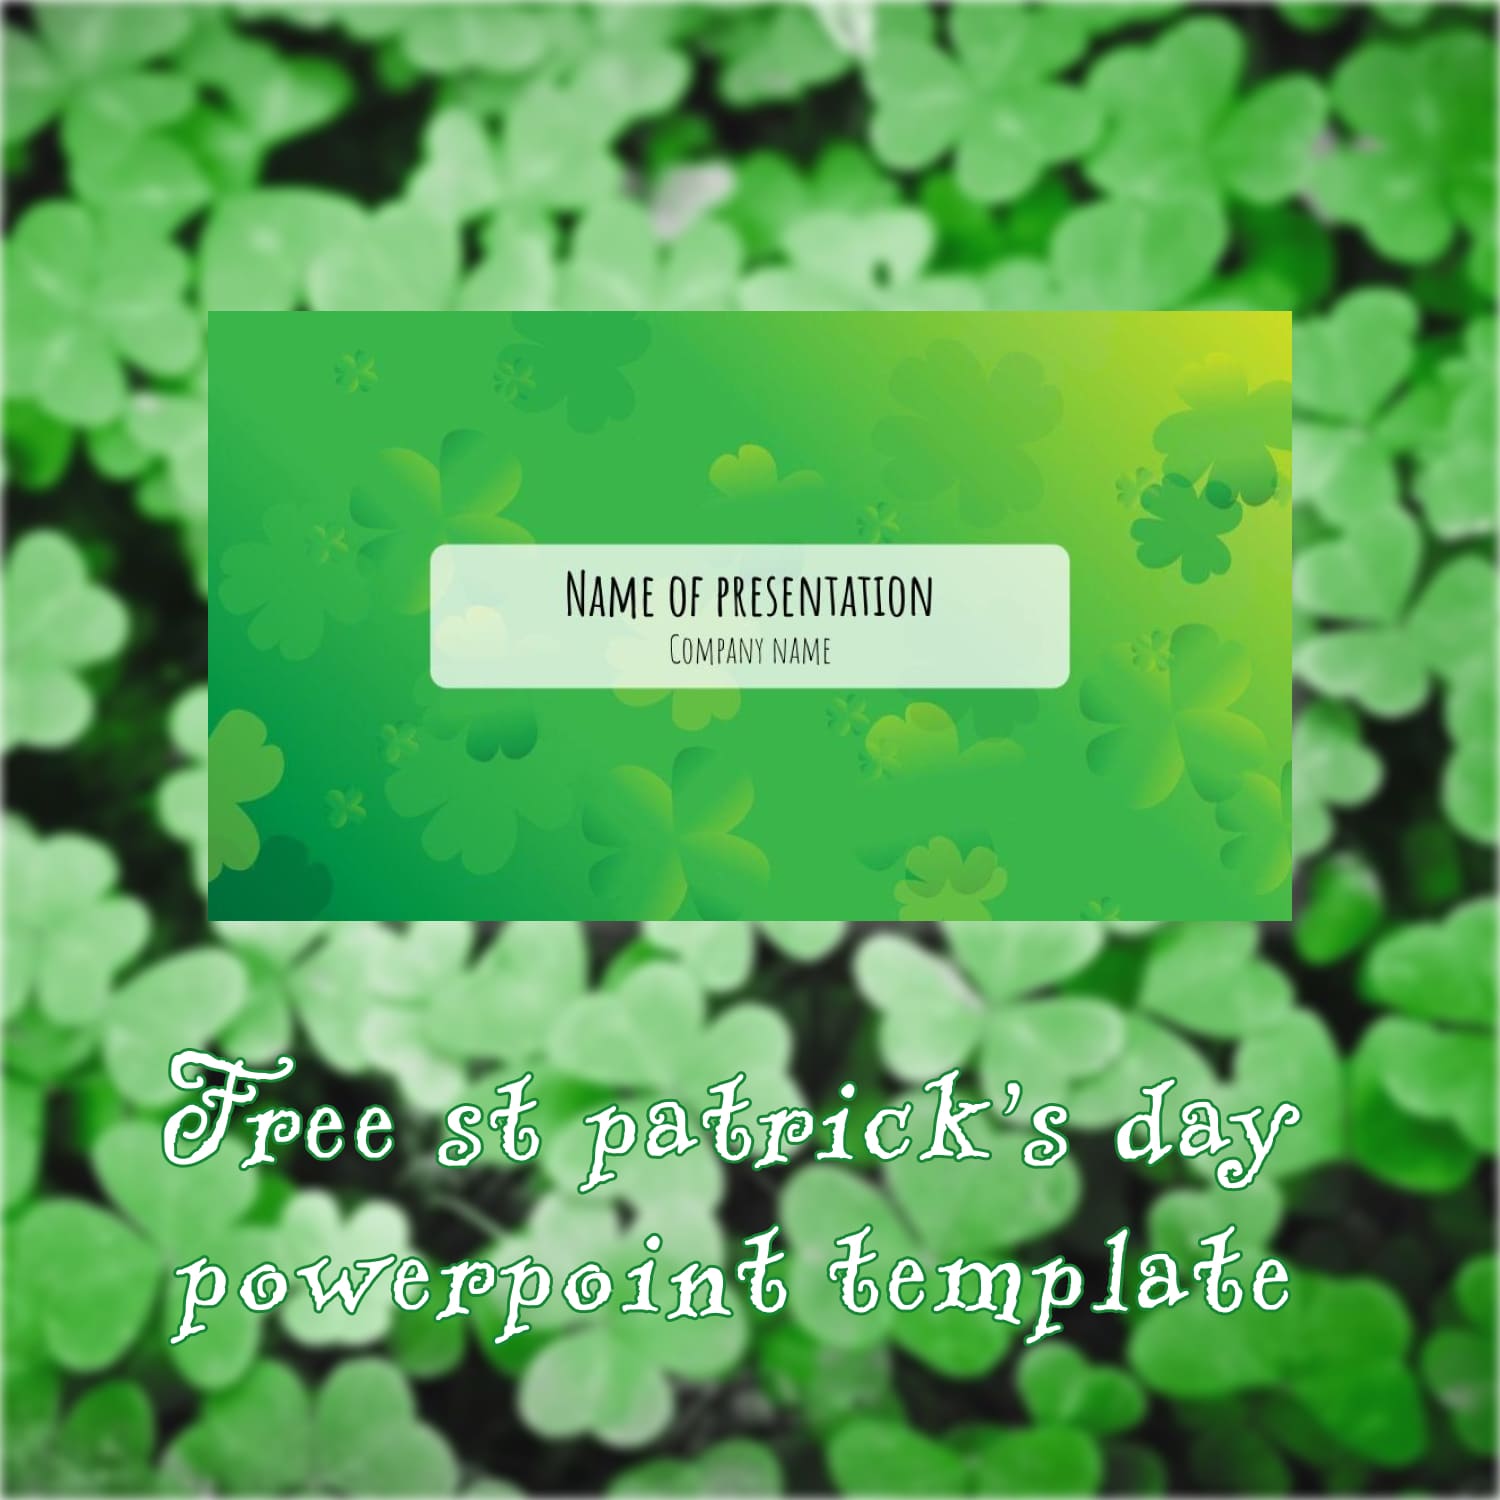 Free St Patrick's Day Powerpoint Template Cover.